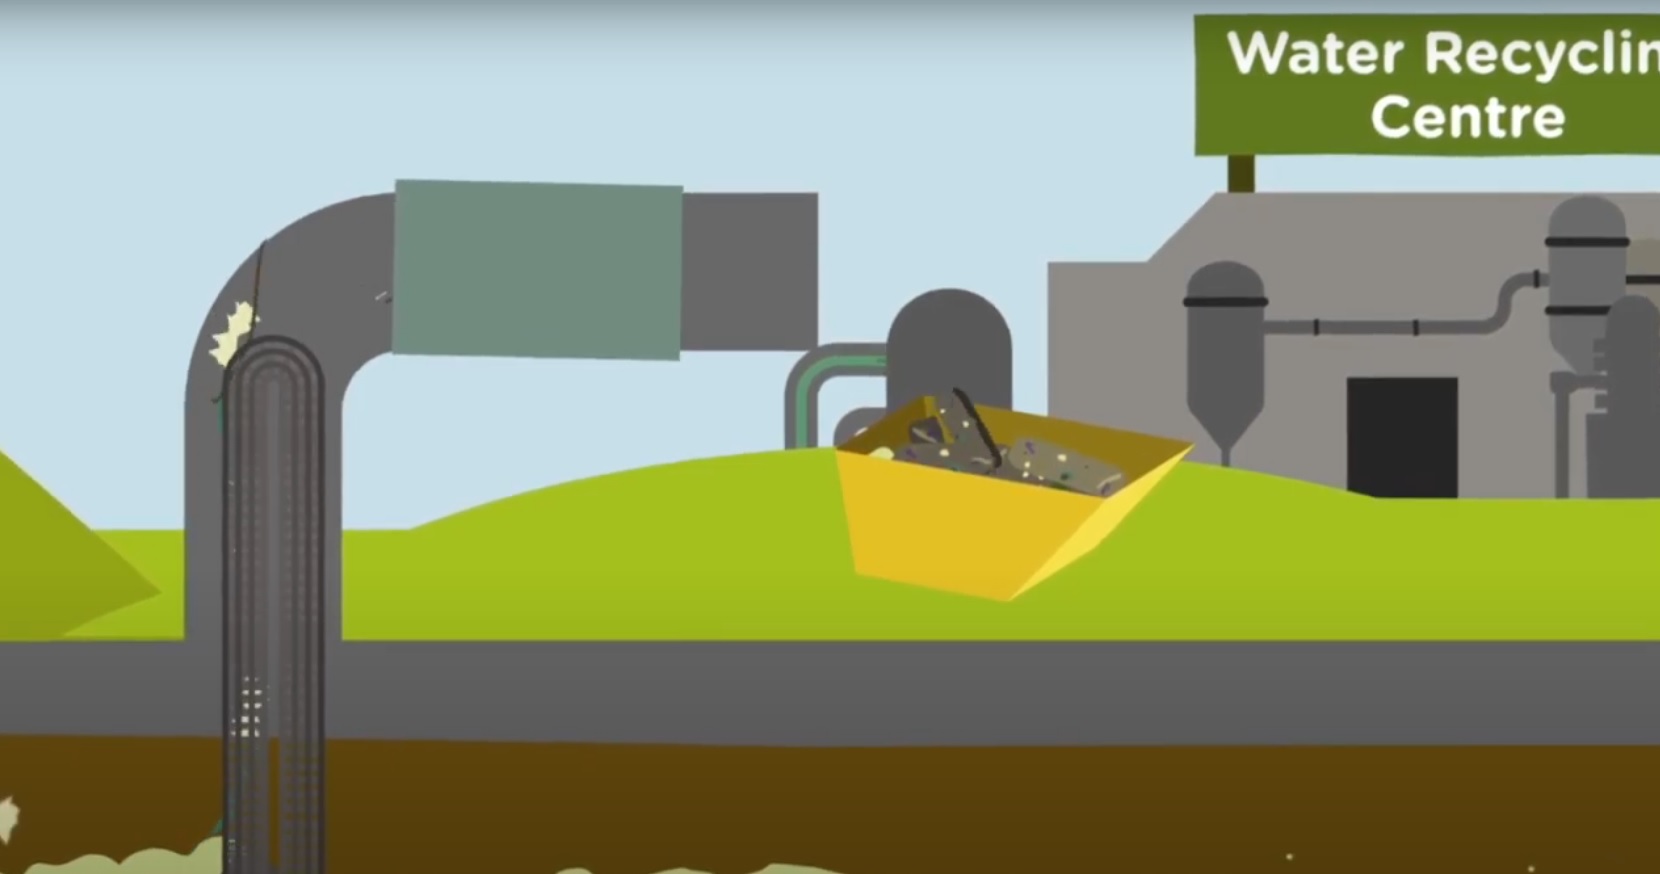 Anglian Water: Sewage treatment and water recycling